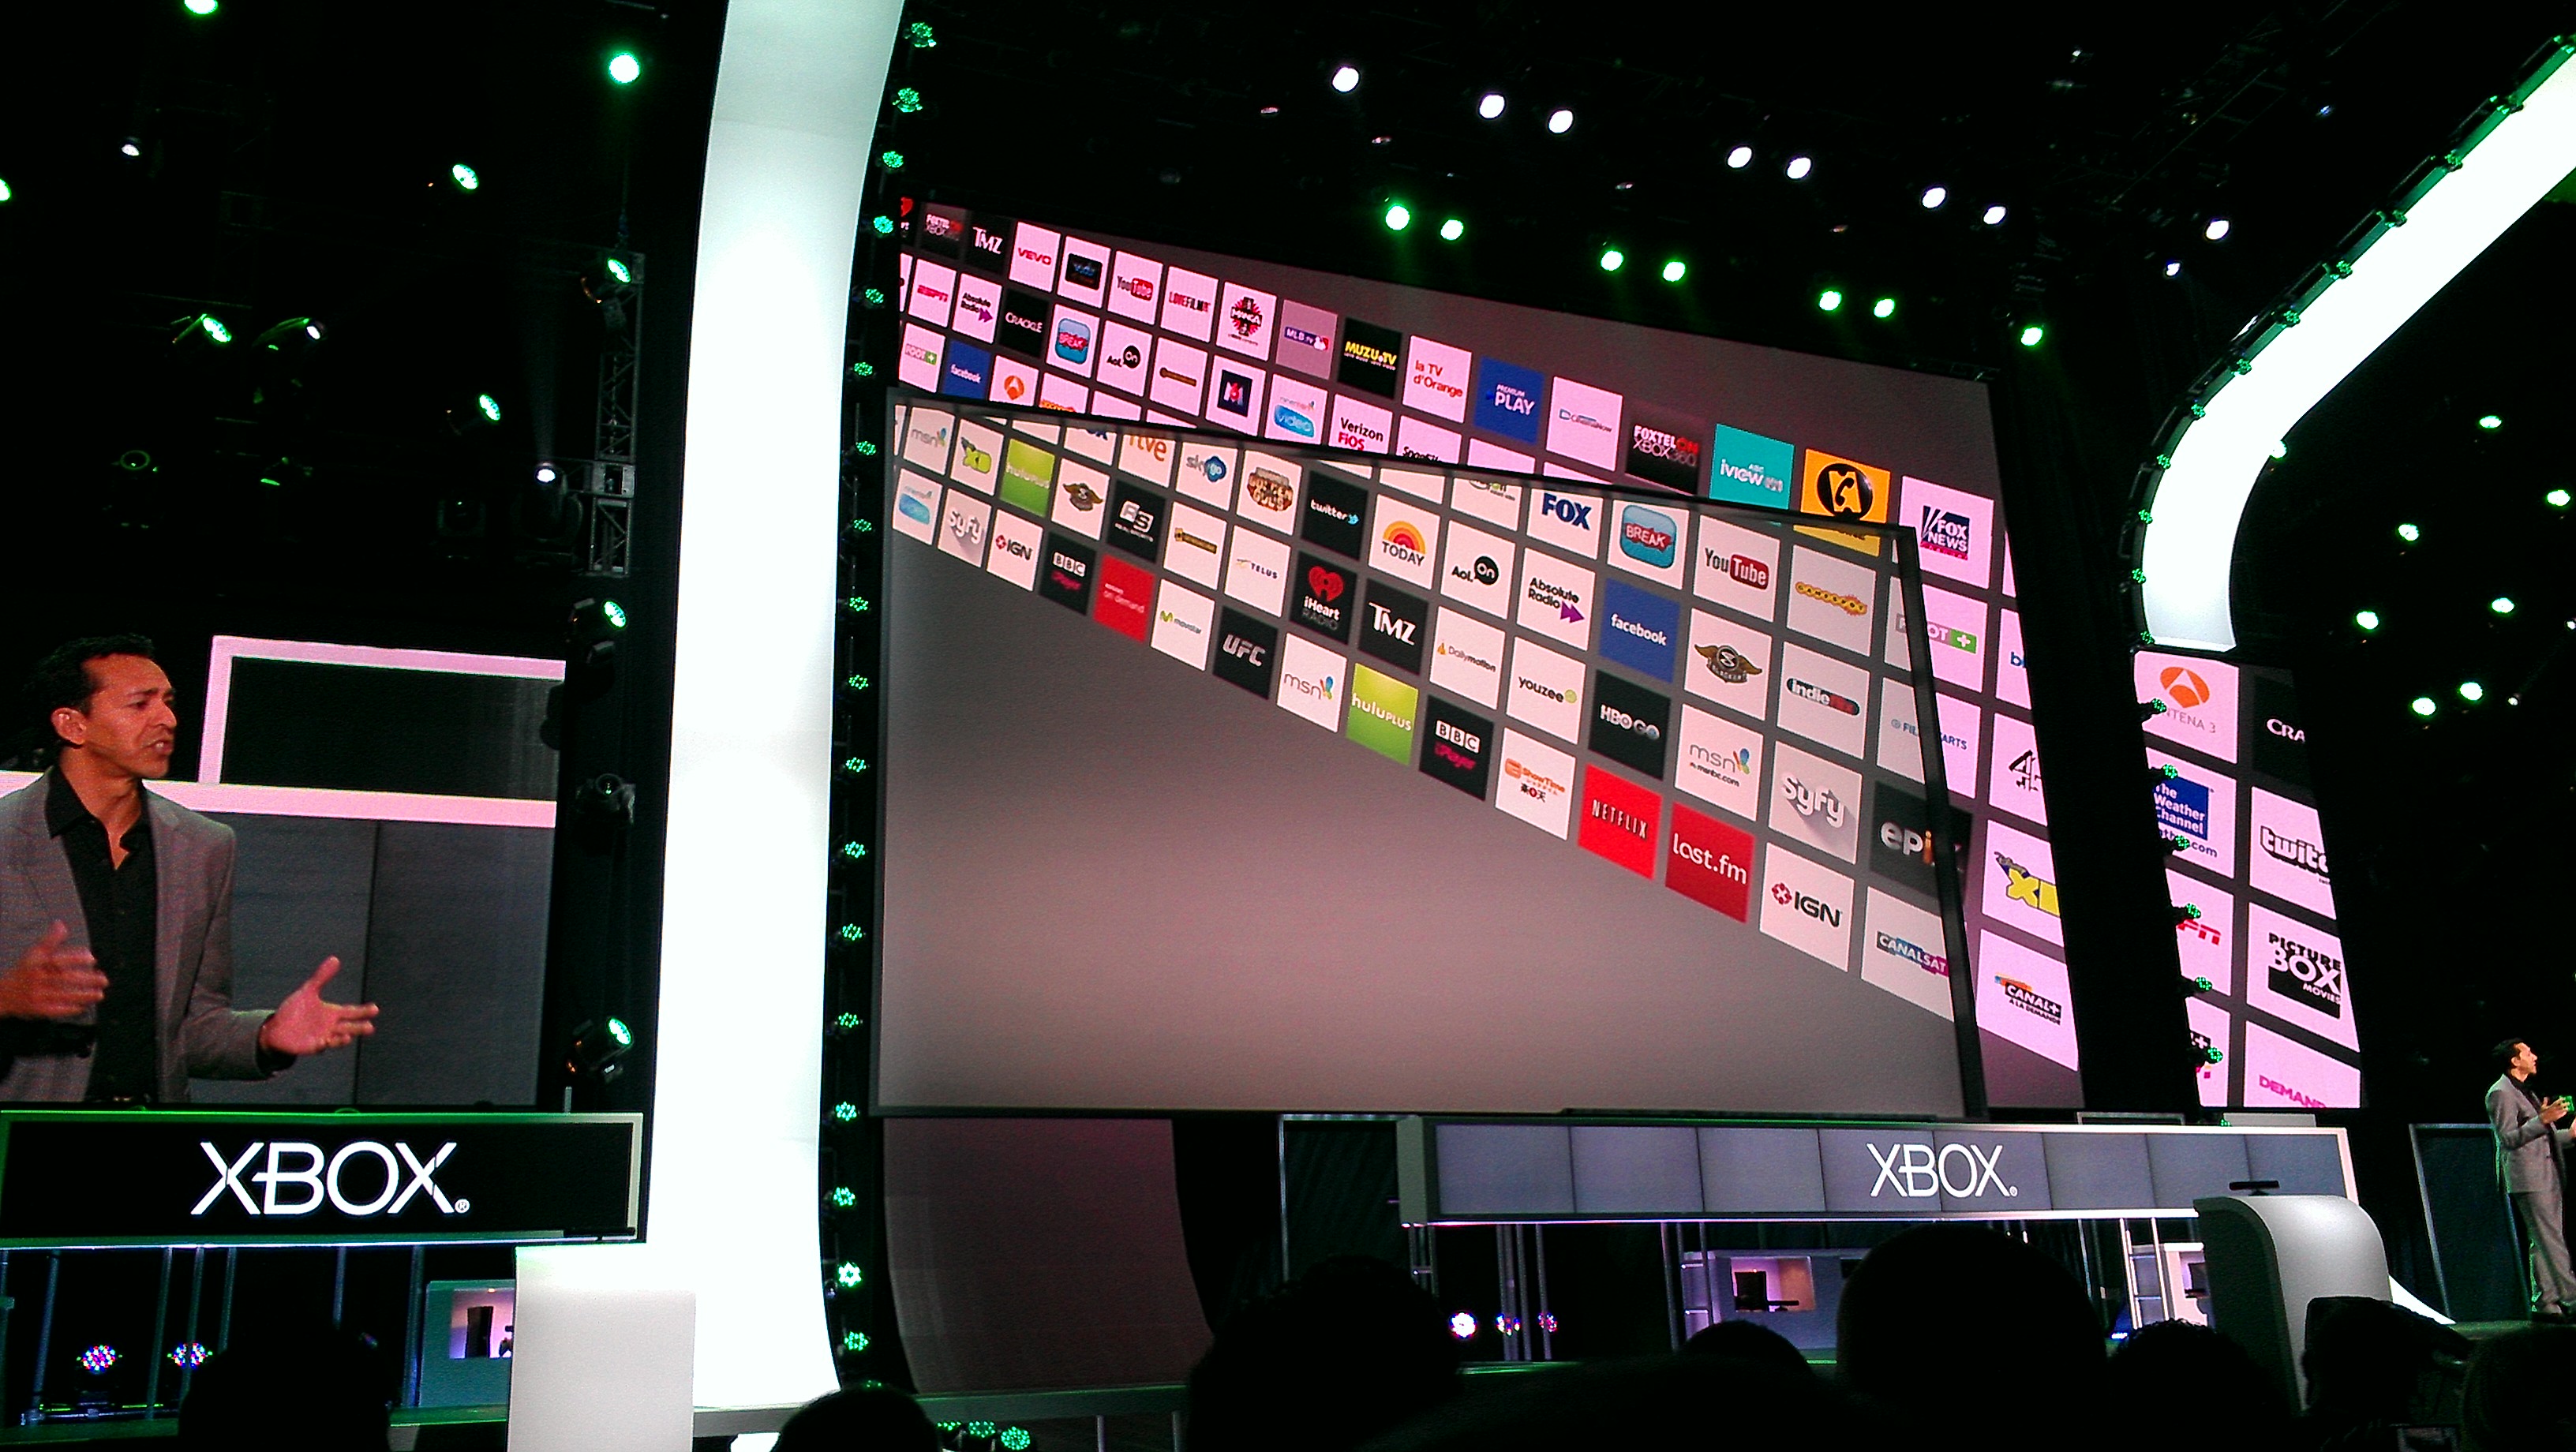 The Xbox 360 Gets Reloaded with Even More Media Partners